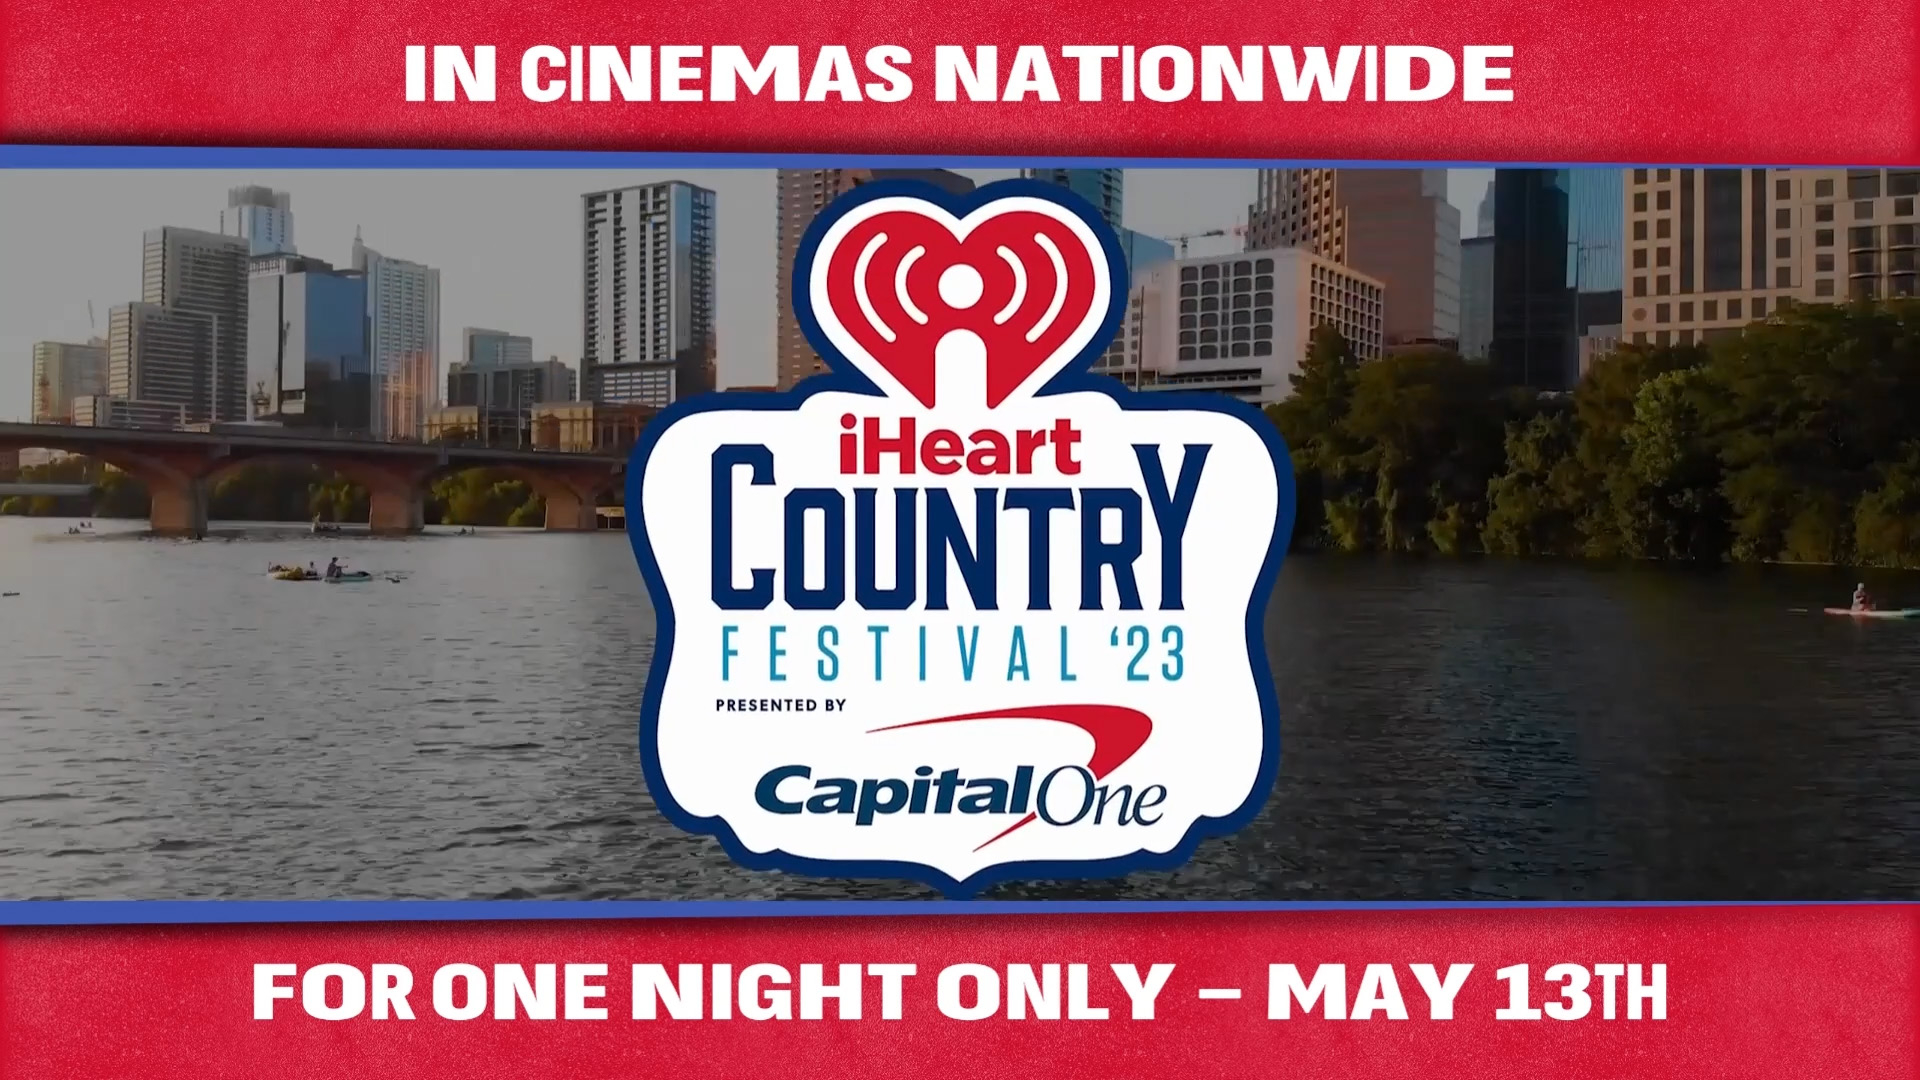 Joe Hand Promotions partners with iHeartMedia to present one-night-only iHeartCountry Festival viewing experience in theaters worldwide on May 13. Live simulcast will feature full lineup of leading country stars including Luke Bryan, Kane Brown, Sam Hunt, Elle King and more.